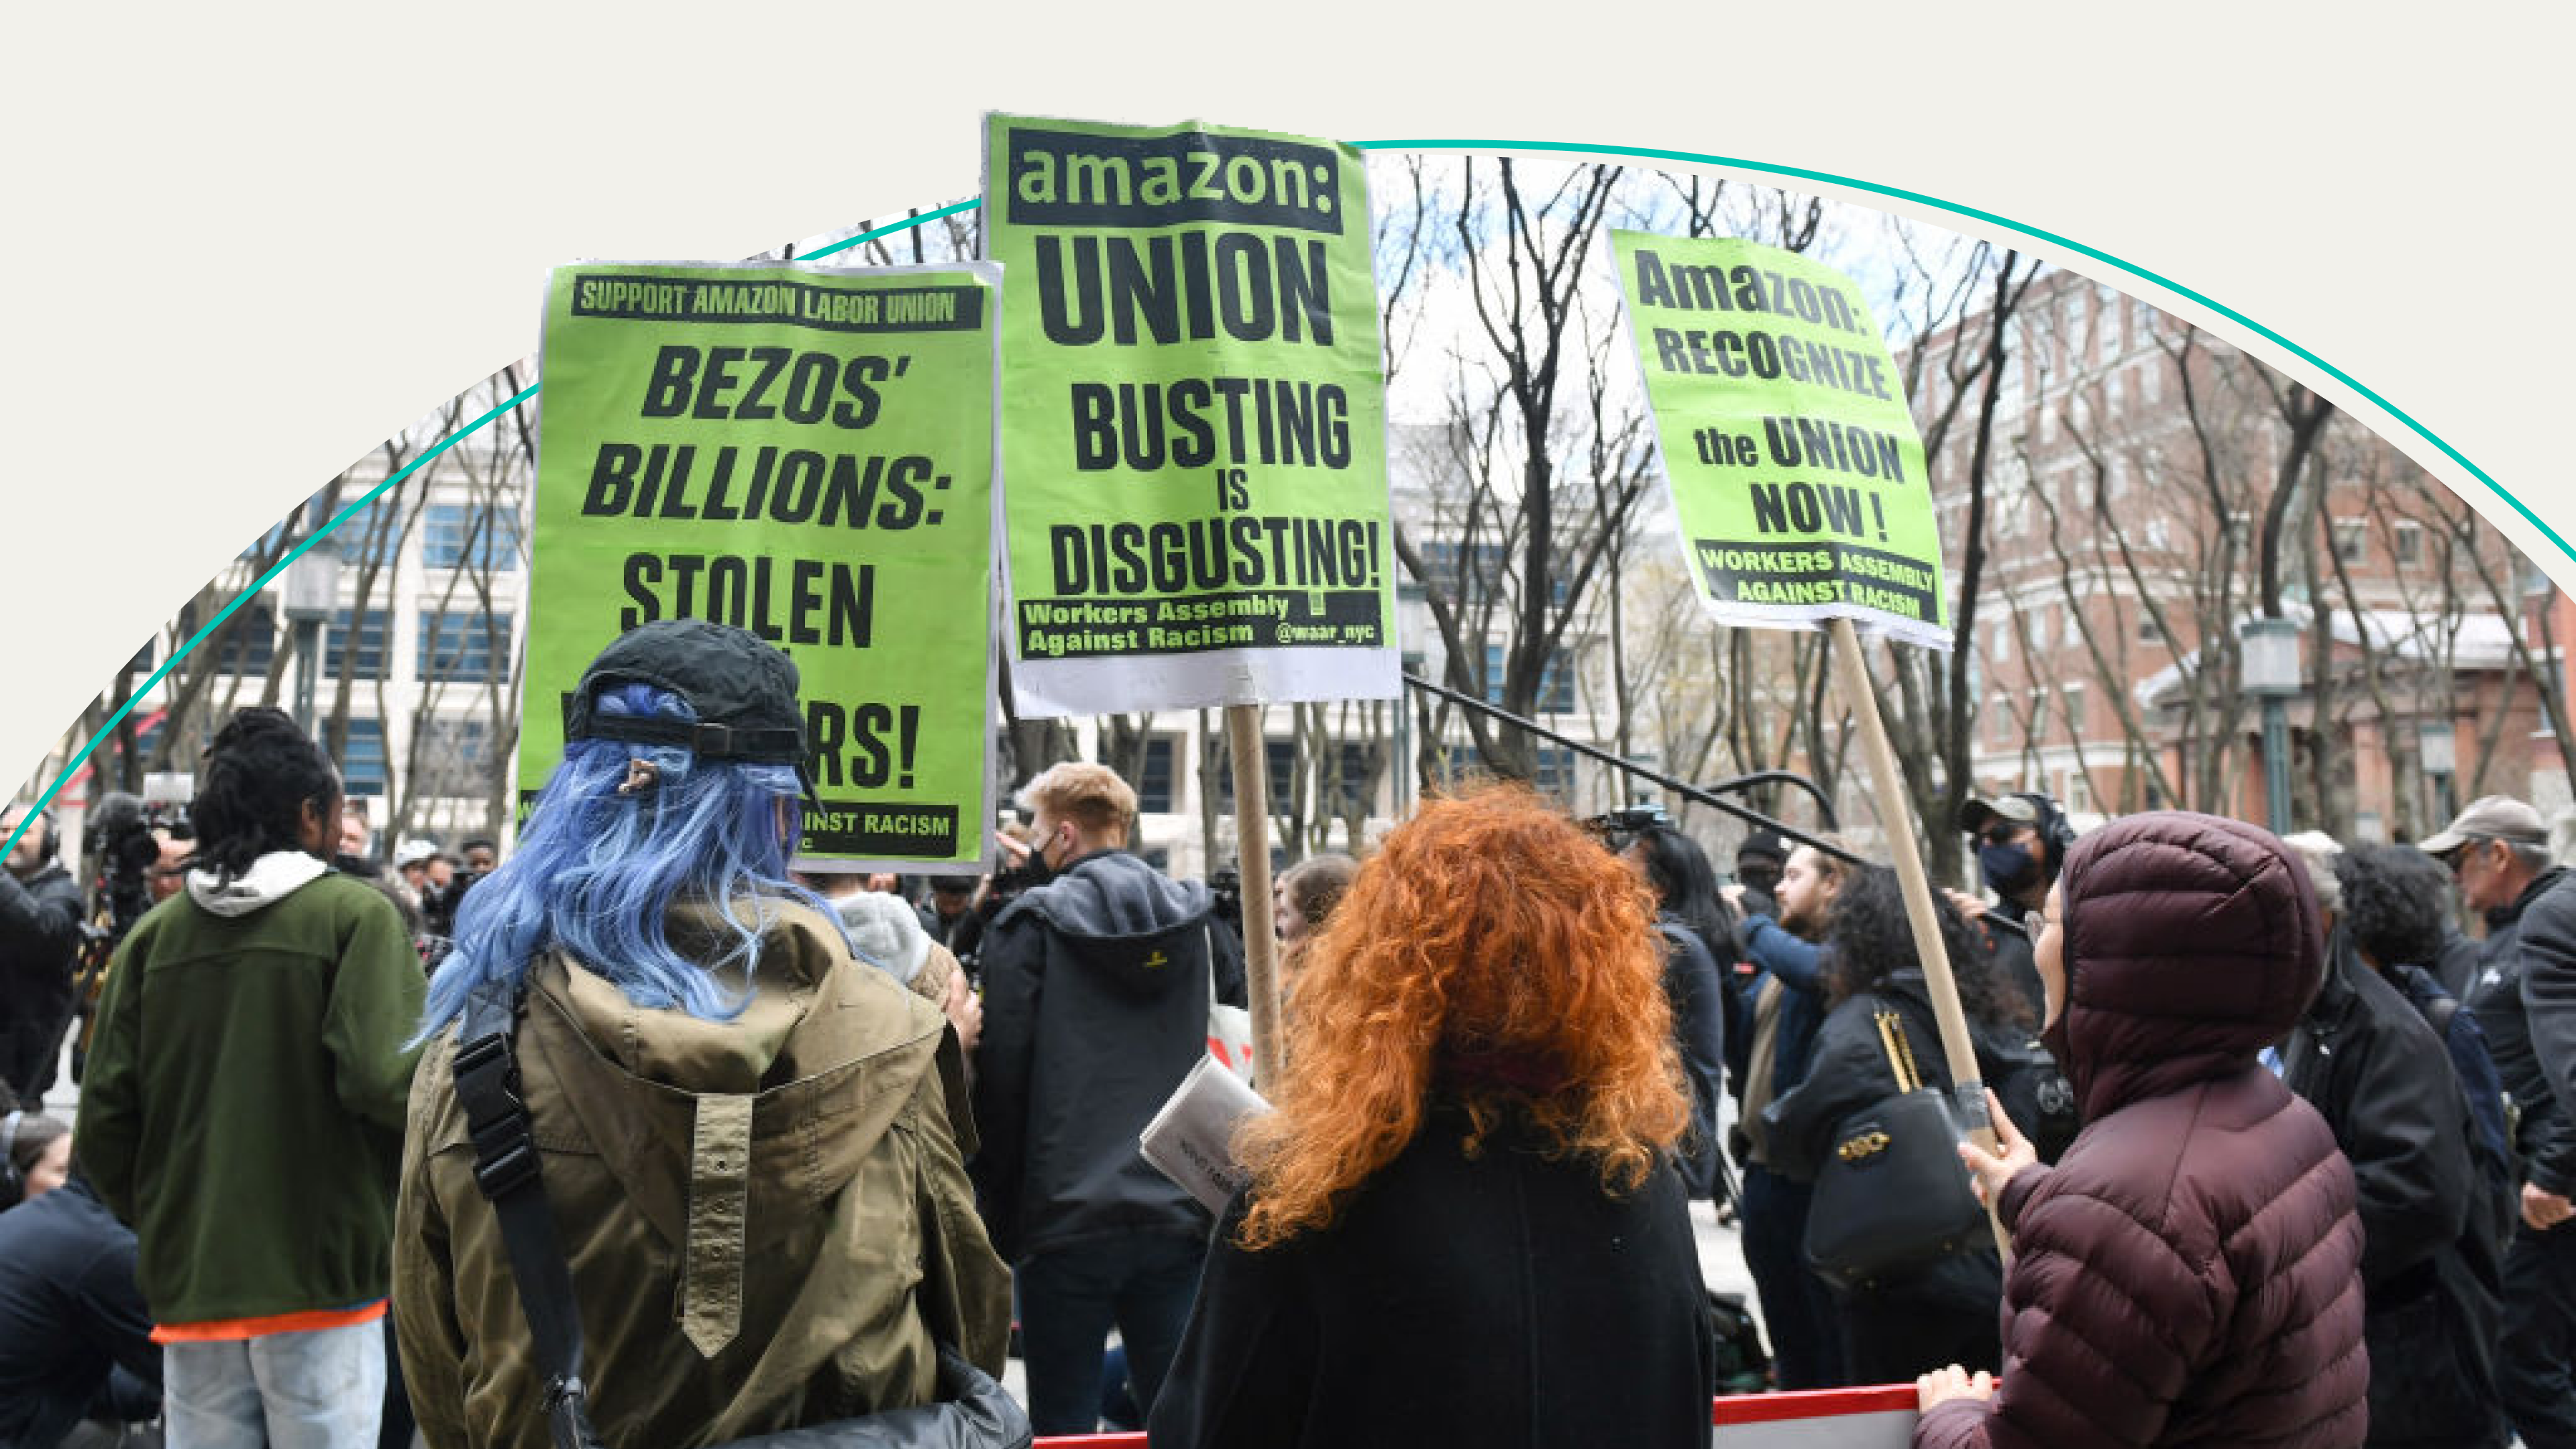 Amazon union supporters holding signs in New York.